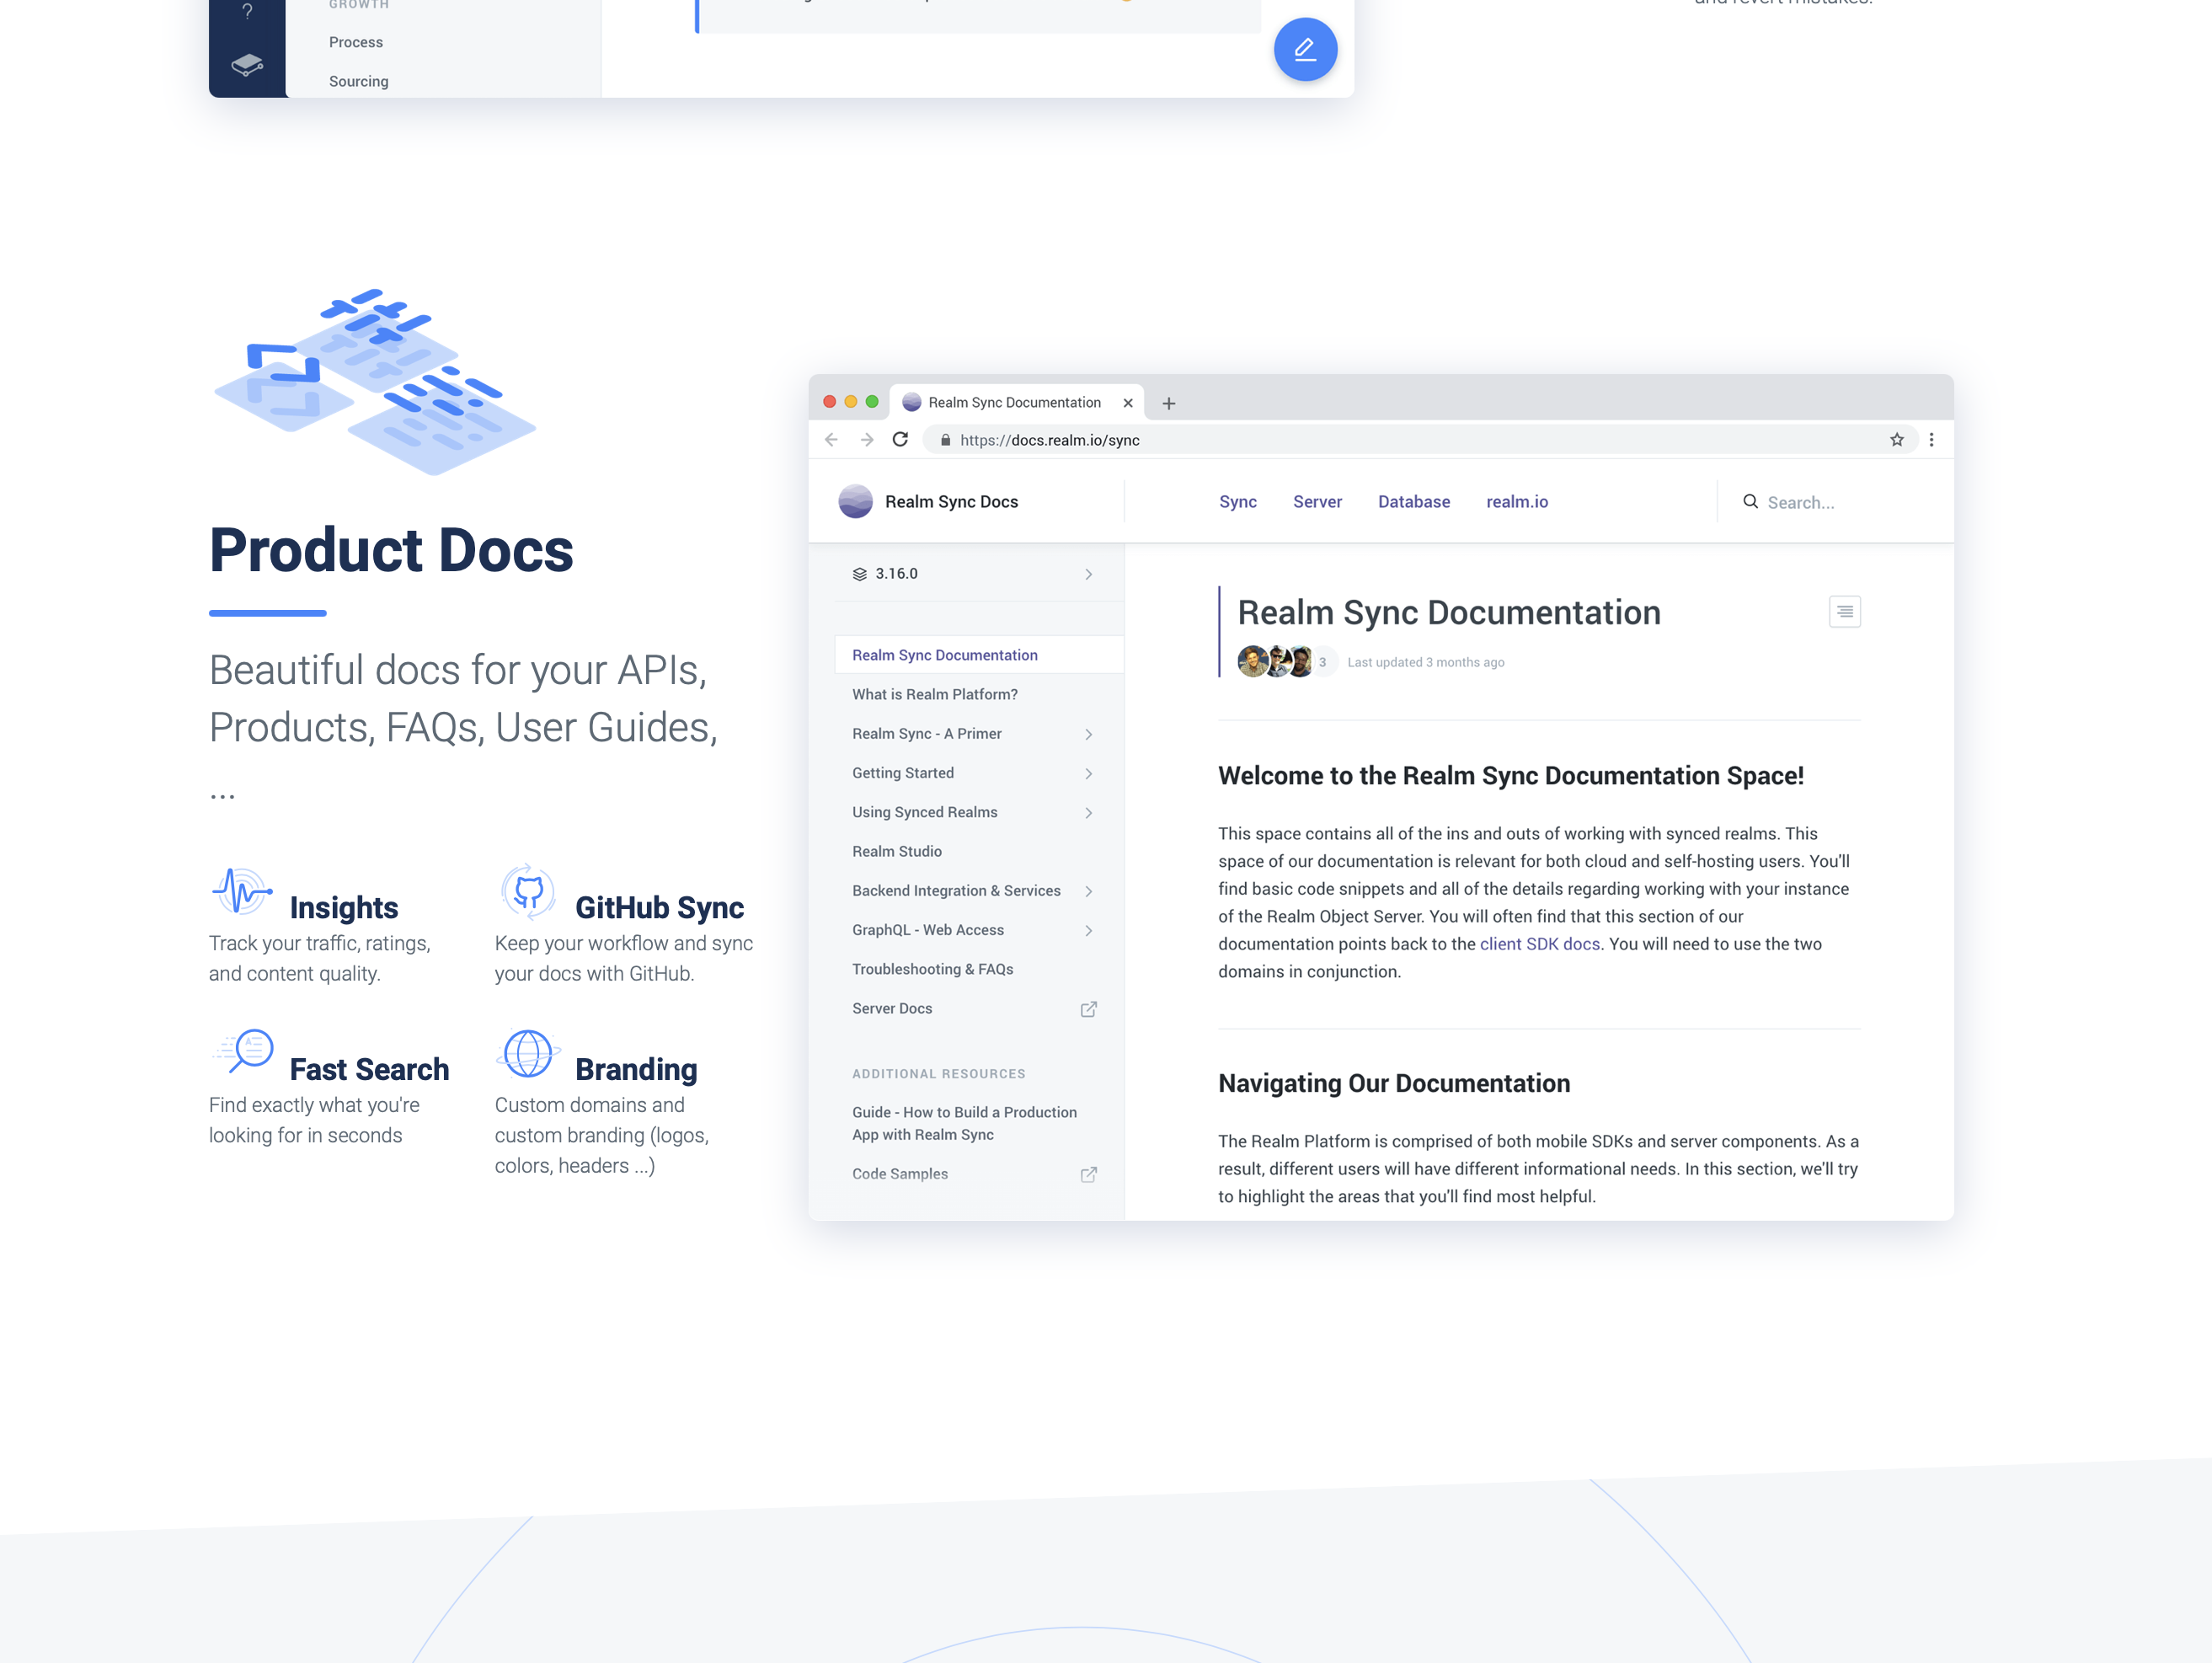 GitBook is a great tool for documenting product's API